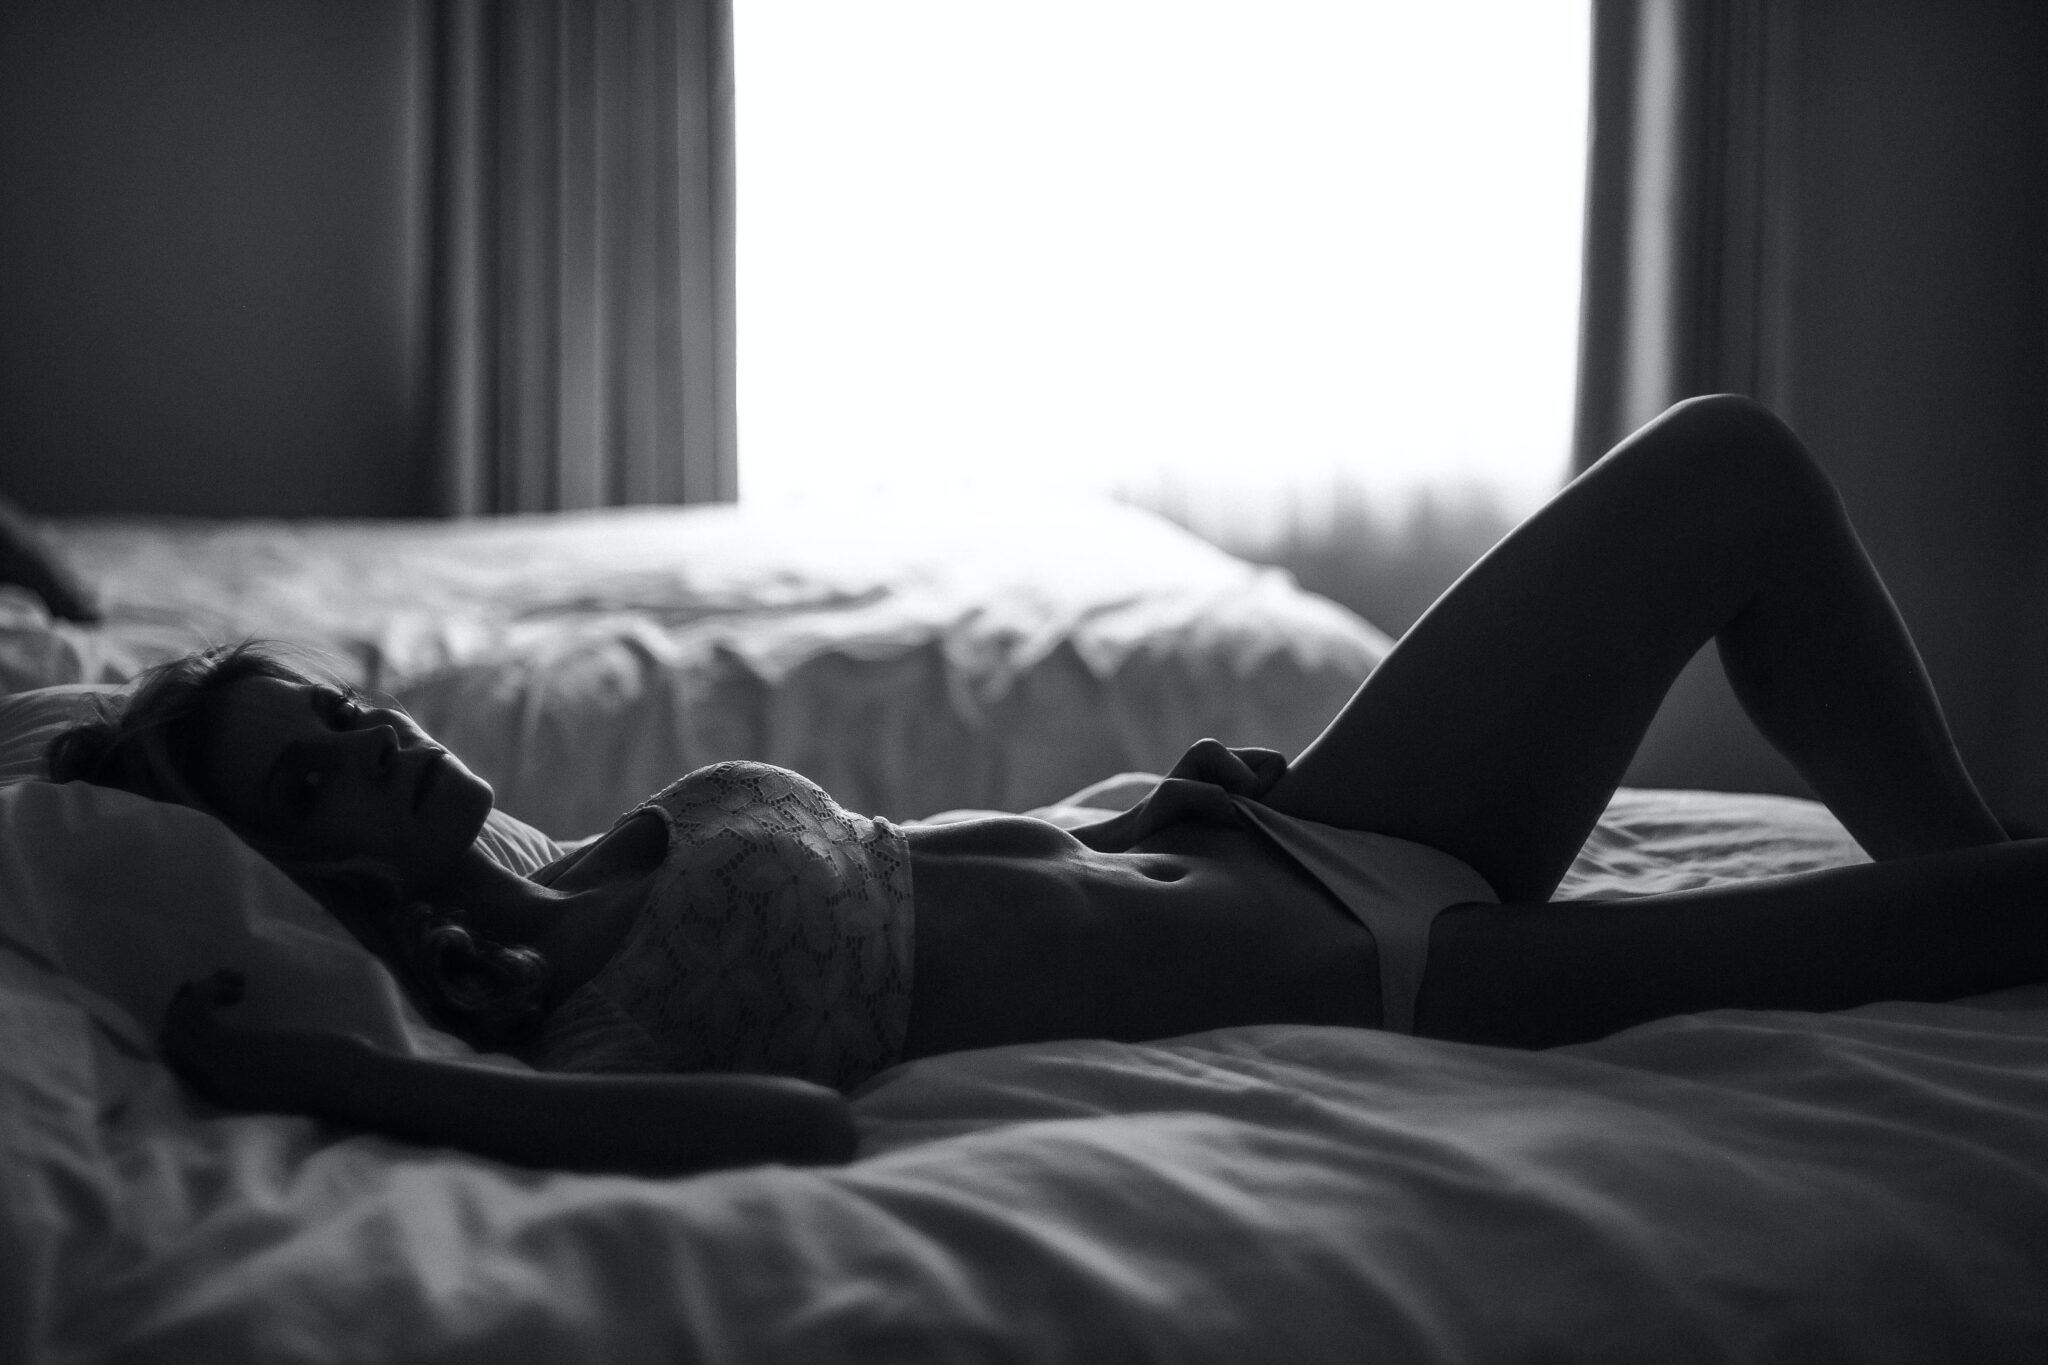 In black and white, a woman lies across her bed in bra and panties.